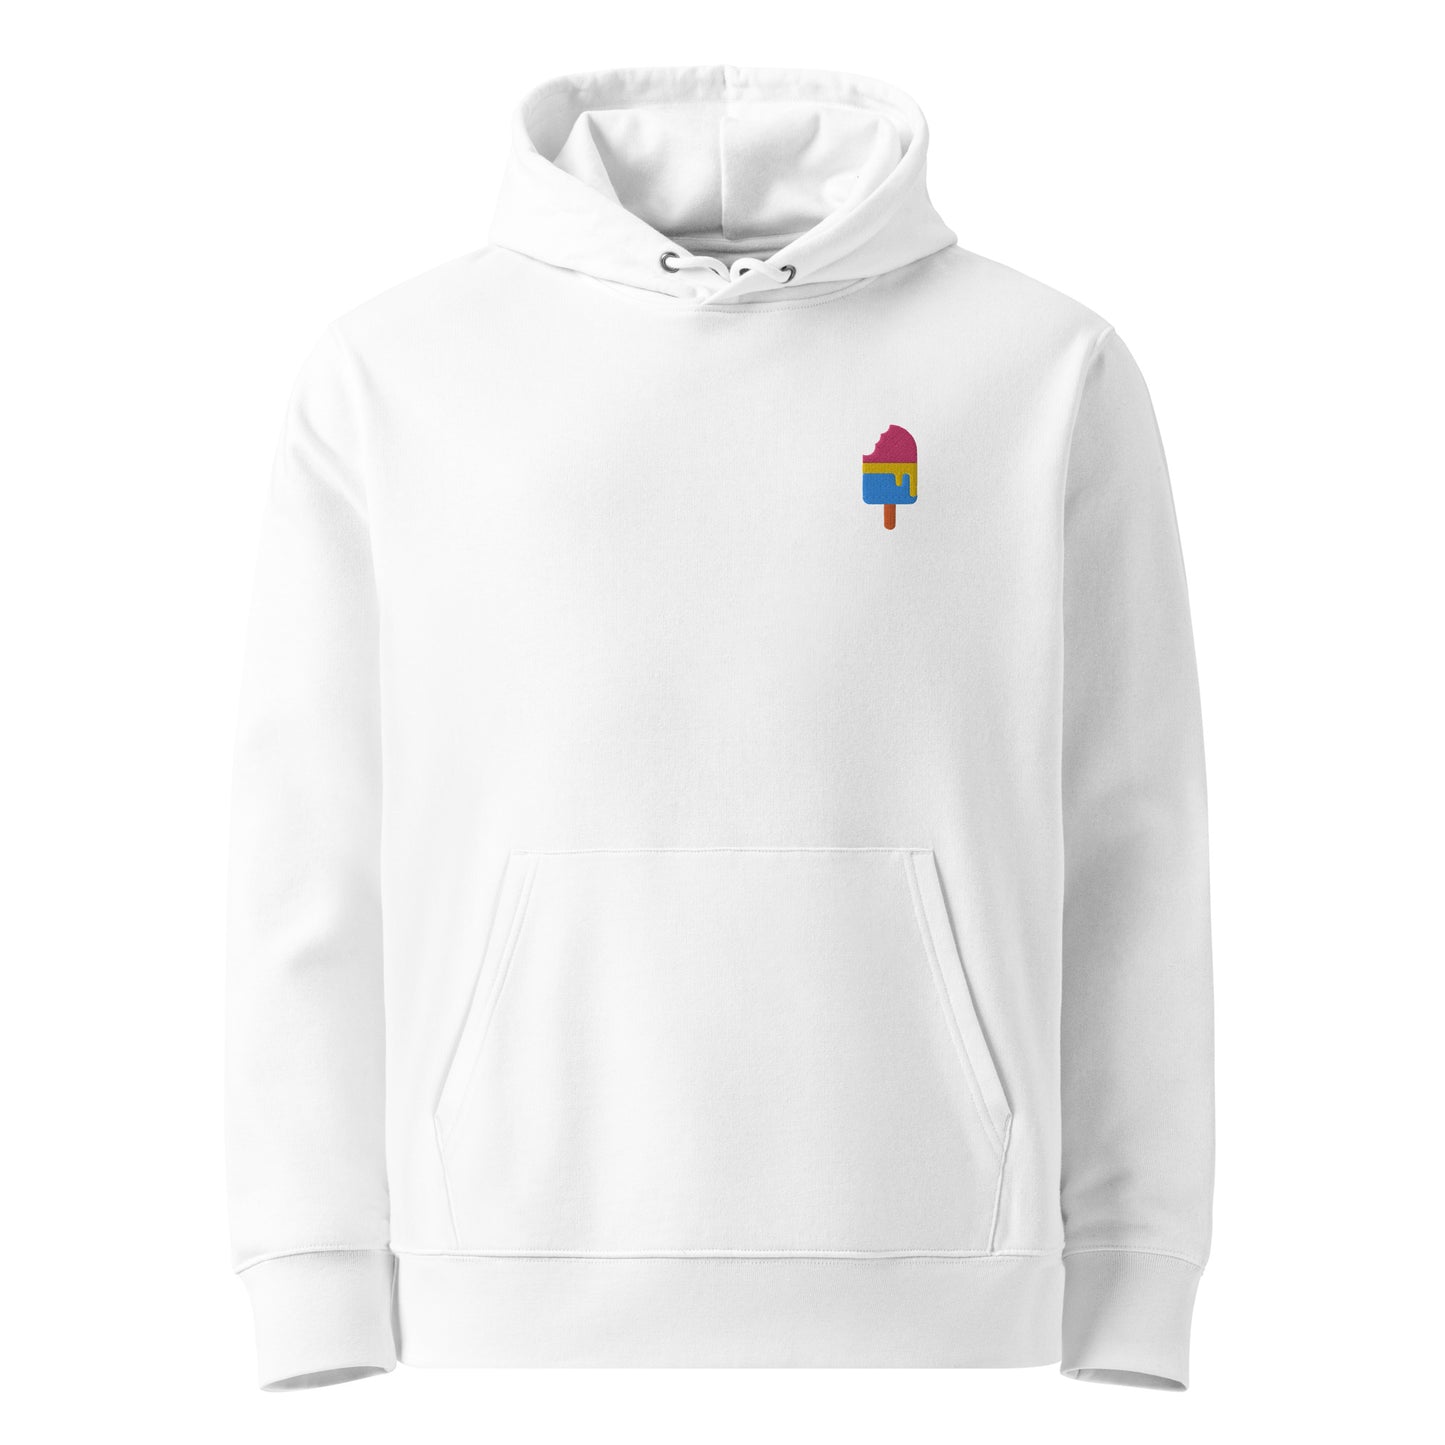 Unisex eco-friendly white hoodie featuring on the upper left chest; a subtle embroidered melting ice cream in pansexual colors, adding a touch of lgbtq to your outfit. sizes: small, medium, large, extra large, double extra large.